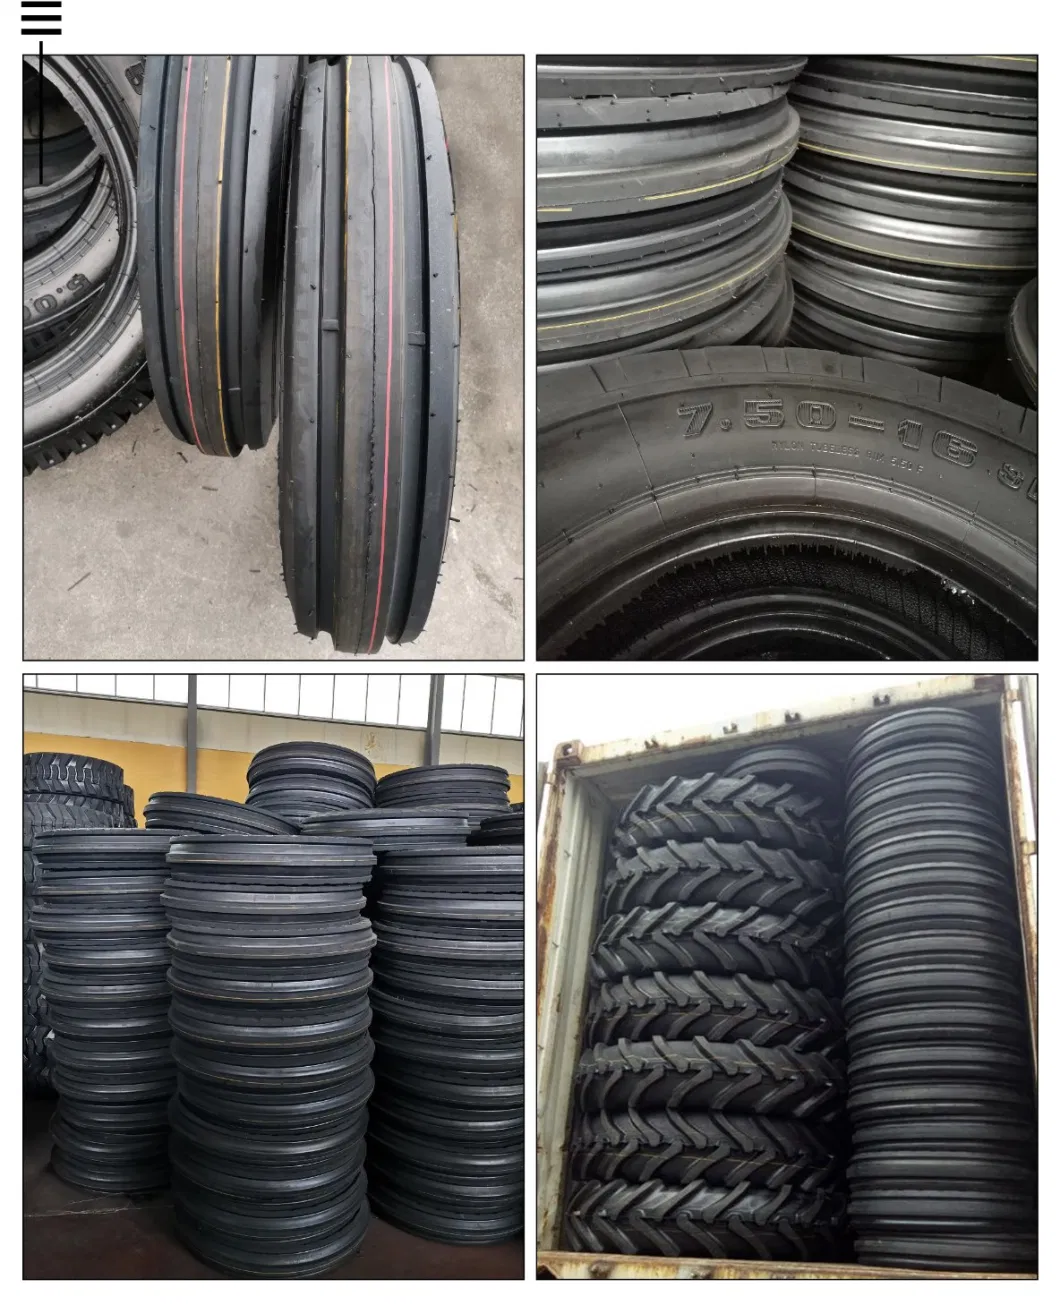 Hanmix Agriculture Industrial Farm Paddy Feald Rice Transplante Irrigation Wheels Solid Rubber Tyres for Tractor and Harvester 4.00-12, 4.00-14